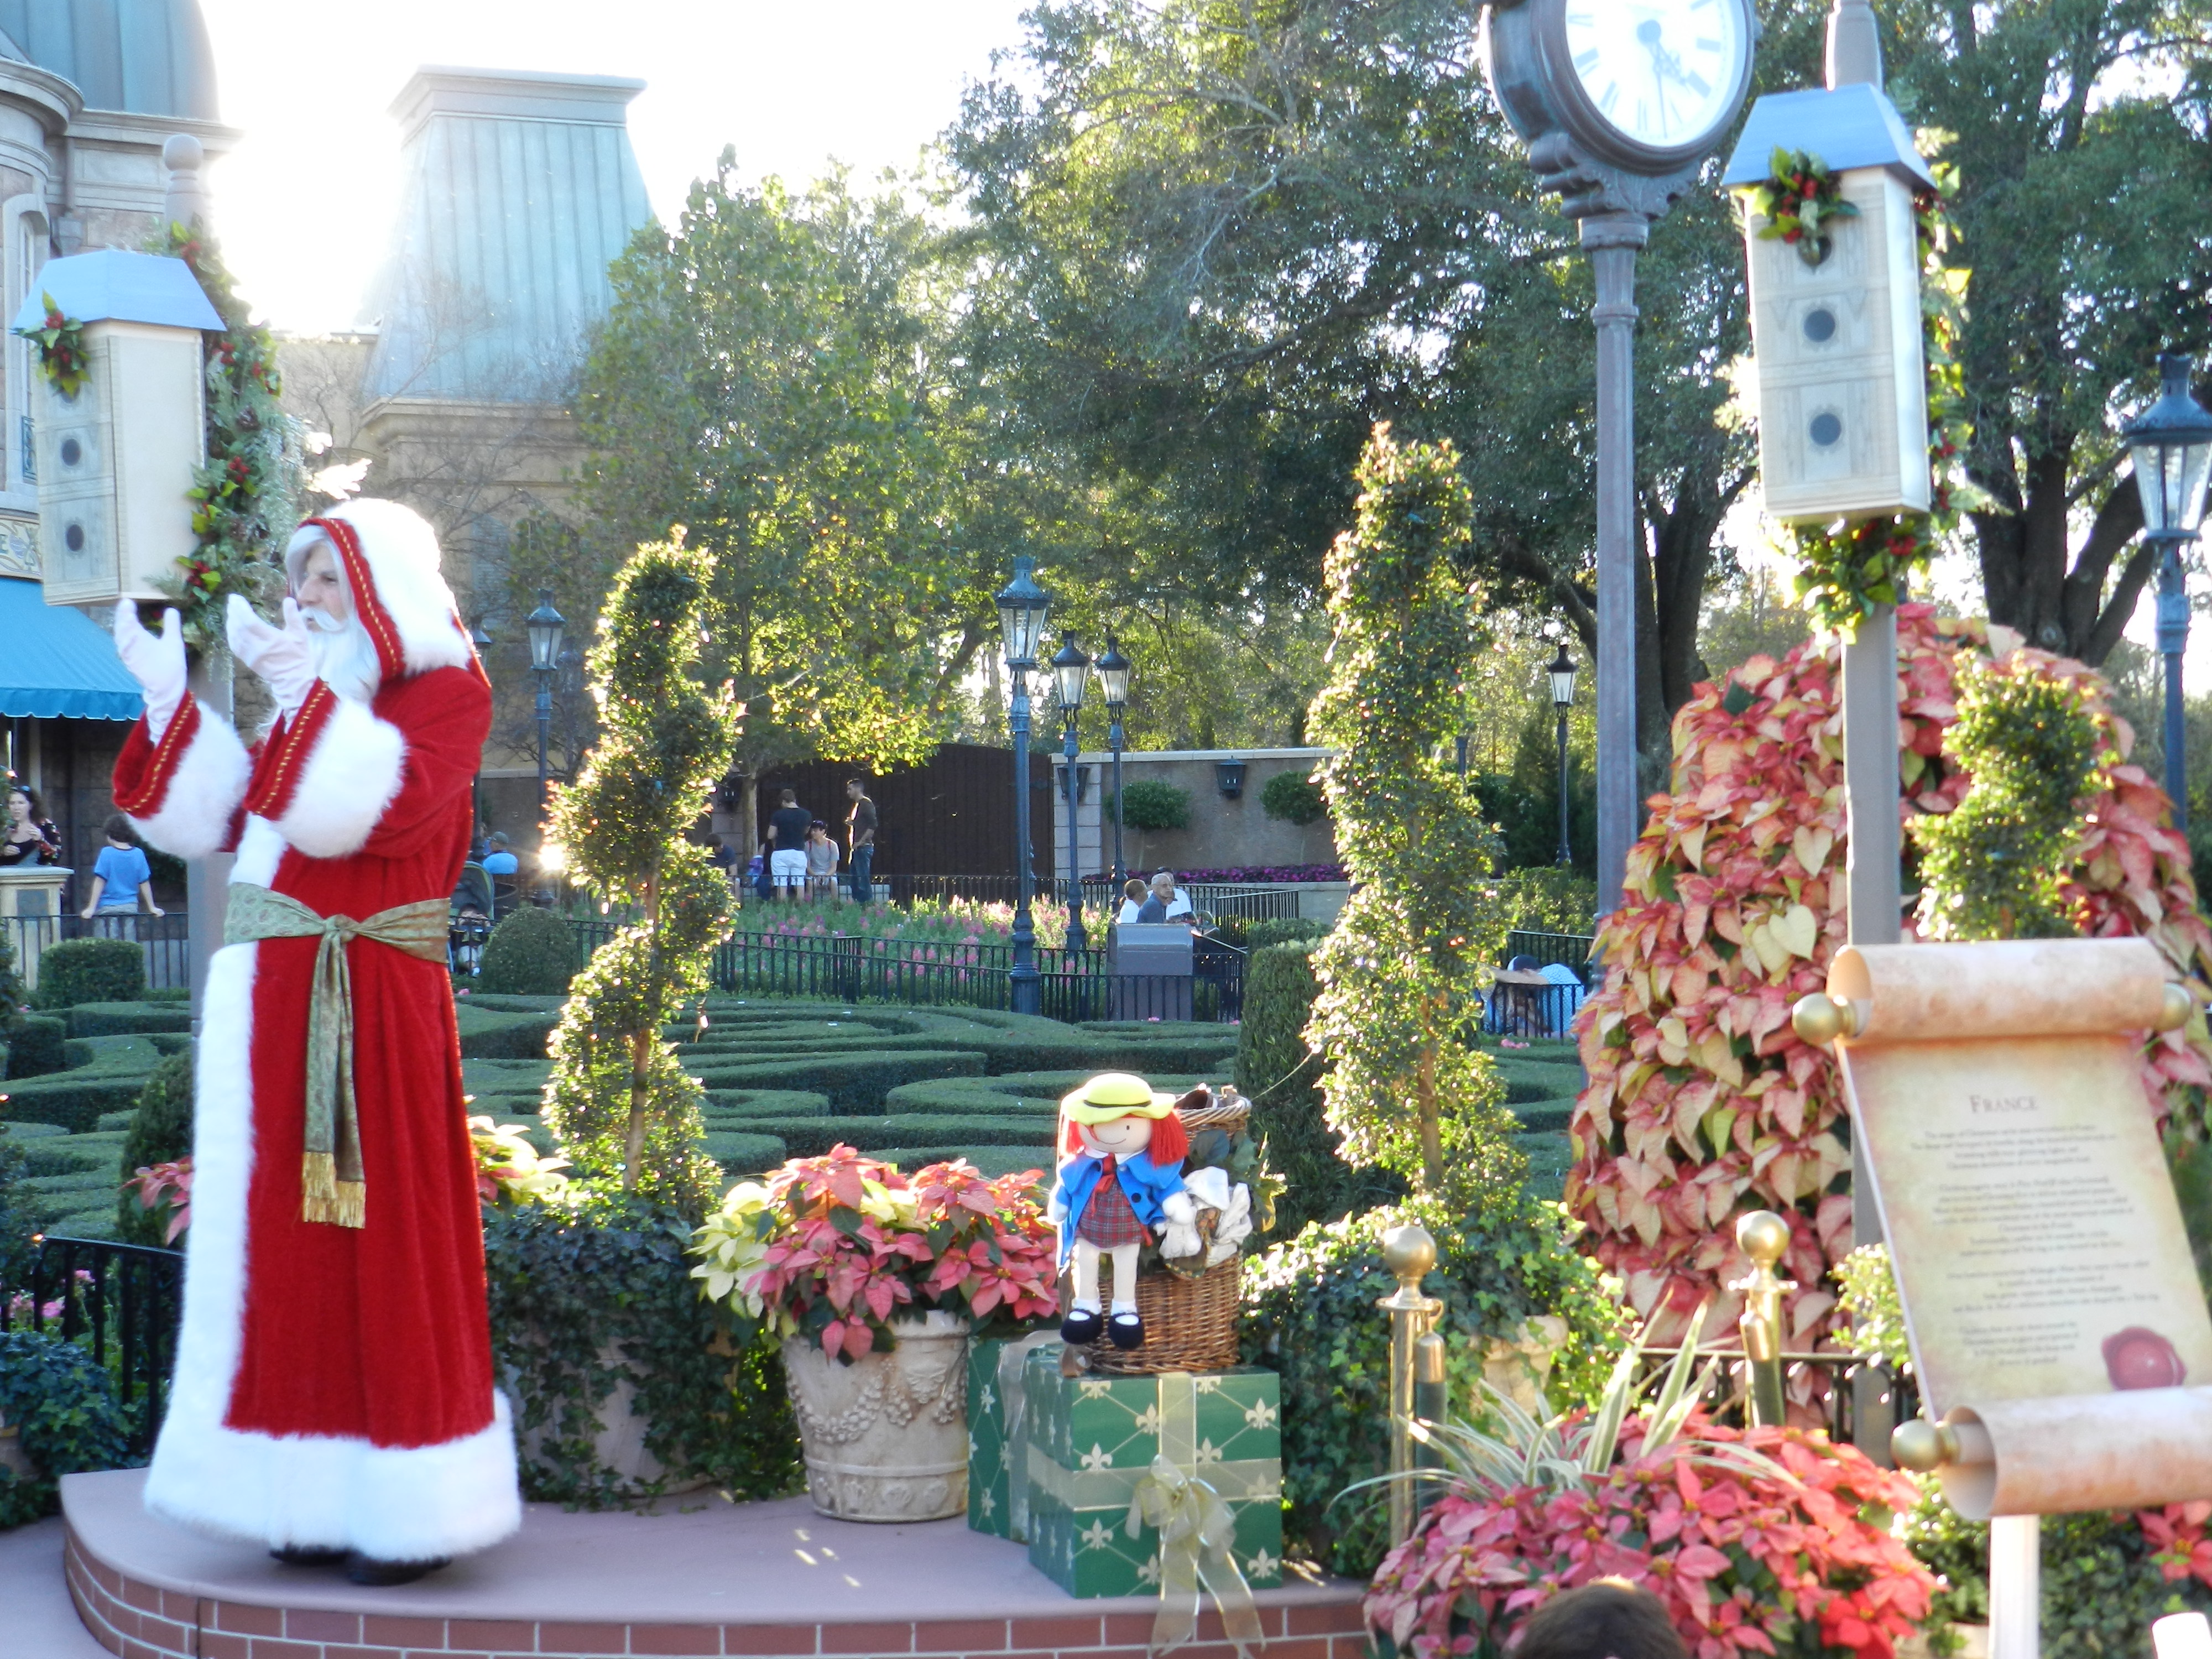 2023 Epcot Festival of the Holidays with Pere Noel in France giving story. Disney Epcot at Christmas.